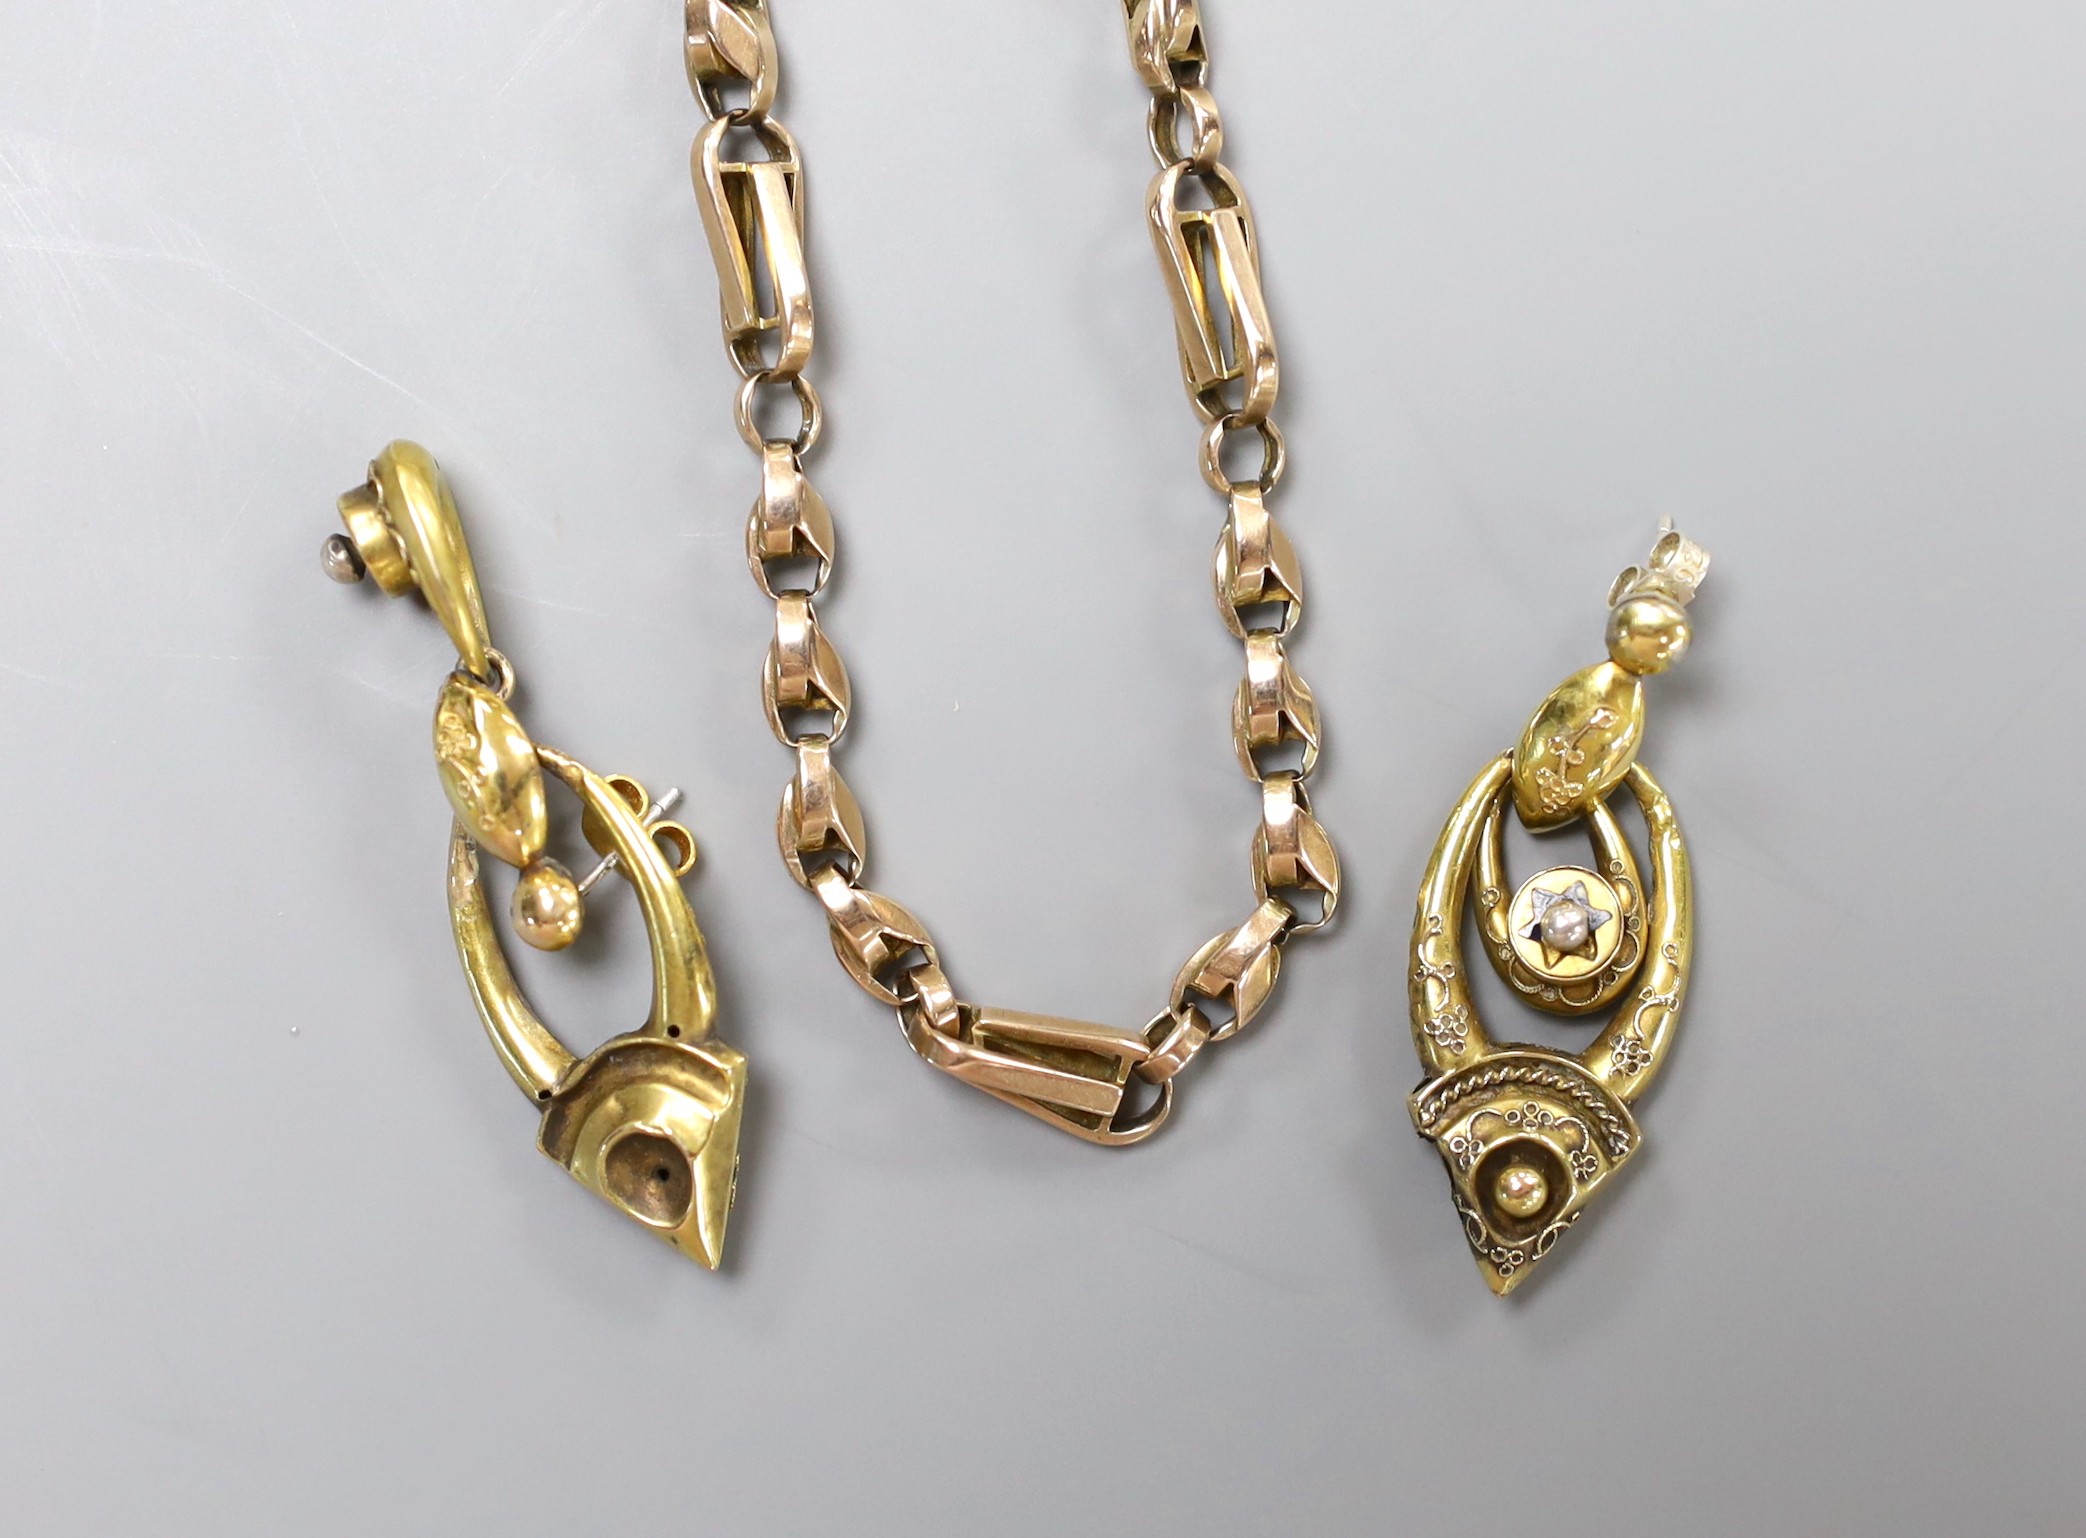 An early 20th century yellow metal necklace with gilt metal extensions, 43cmm gross 13.9 grams, together with a pair of Victorian yellow metal and black enamel set drop earrings, 40mm, gross weight 4.5 grams.